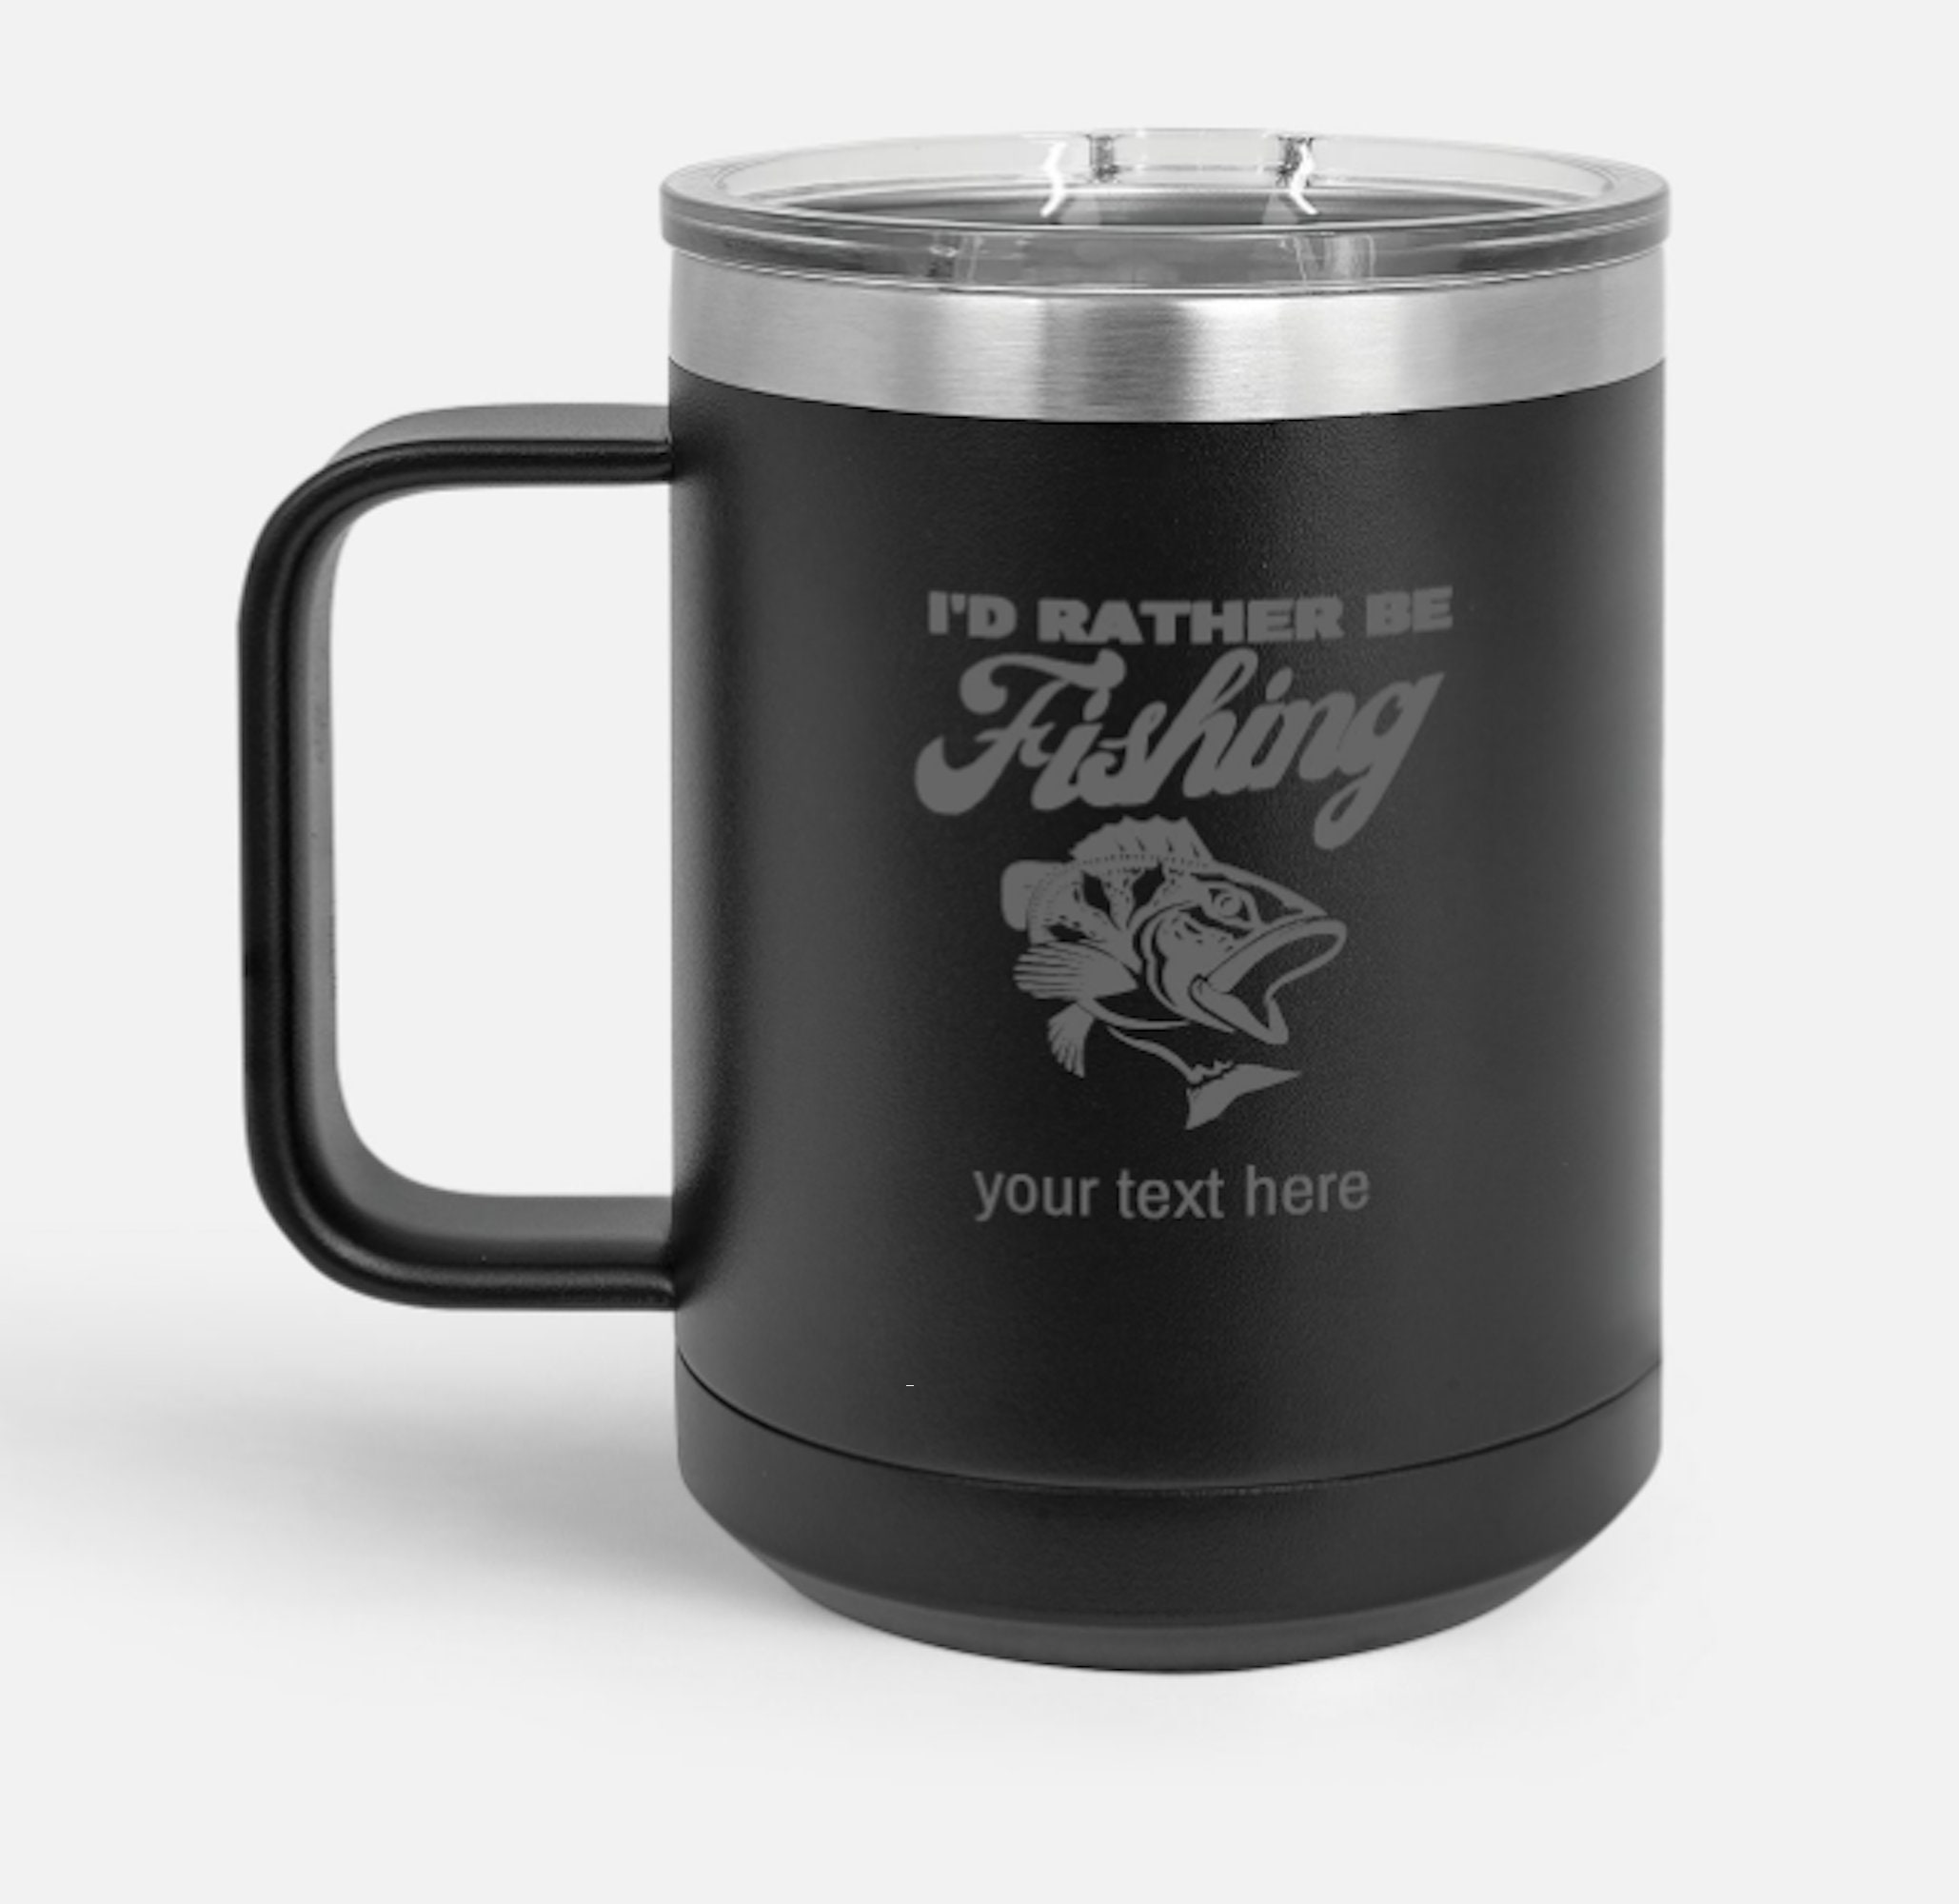 Reel Cool Brother 30oz.Tumblers Brothers Travel Coffee Mug – That's A Cool  Tee